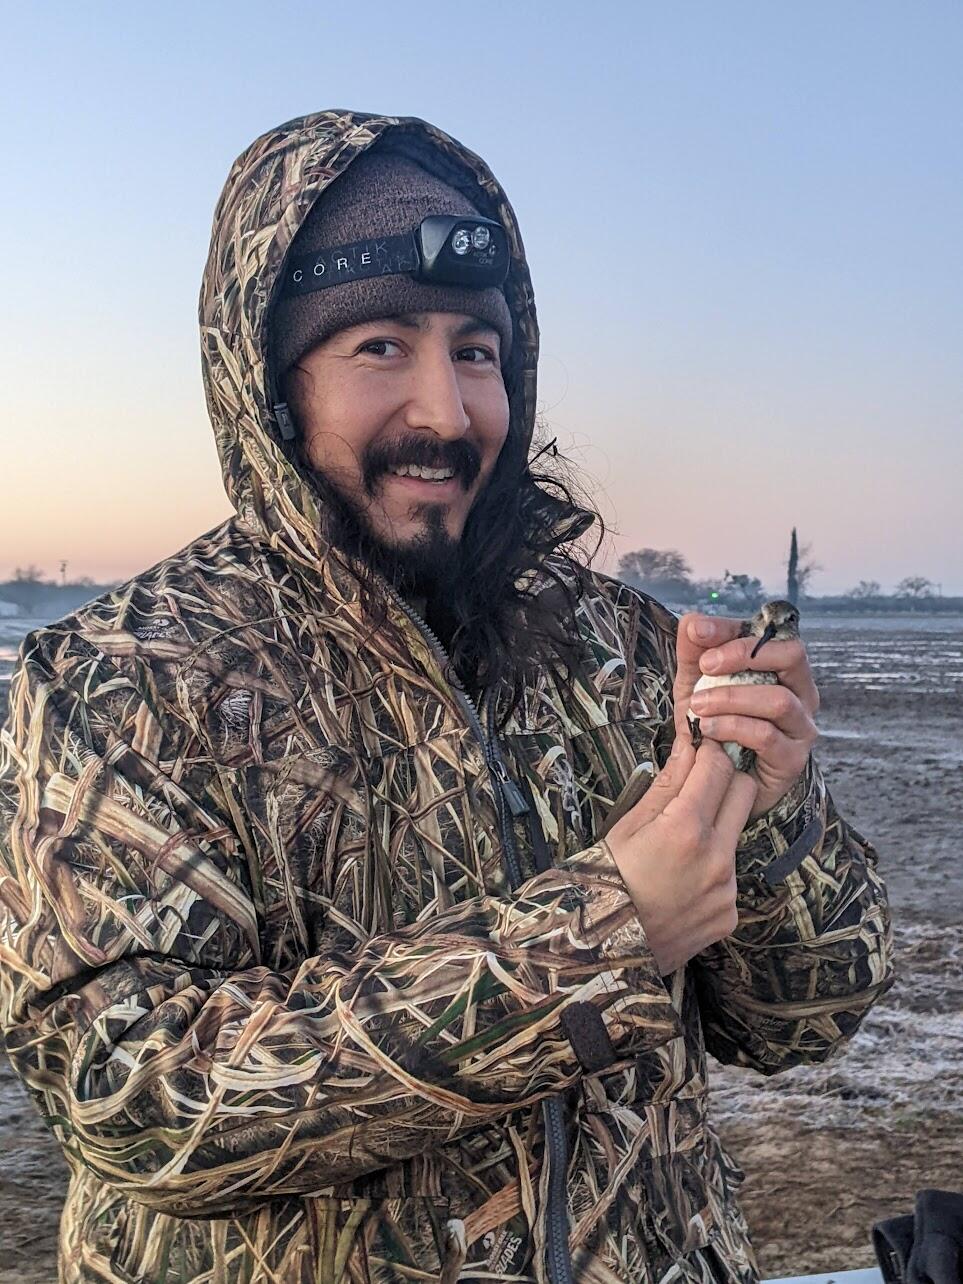 Xerónimo Castañeda holds a Dunlin in his hands while working on a Central Valley farm. The background features a light pink and blue sky just before sunrise, creating a serene and atmospheric setting.